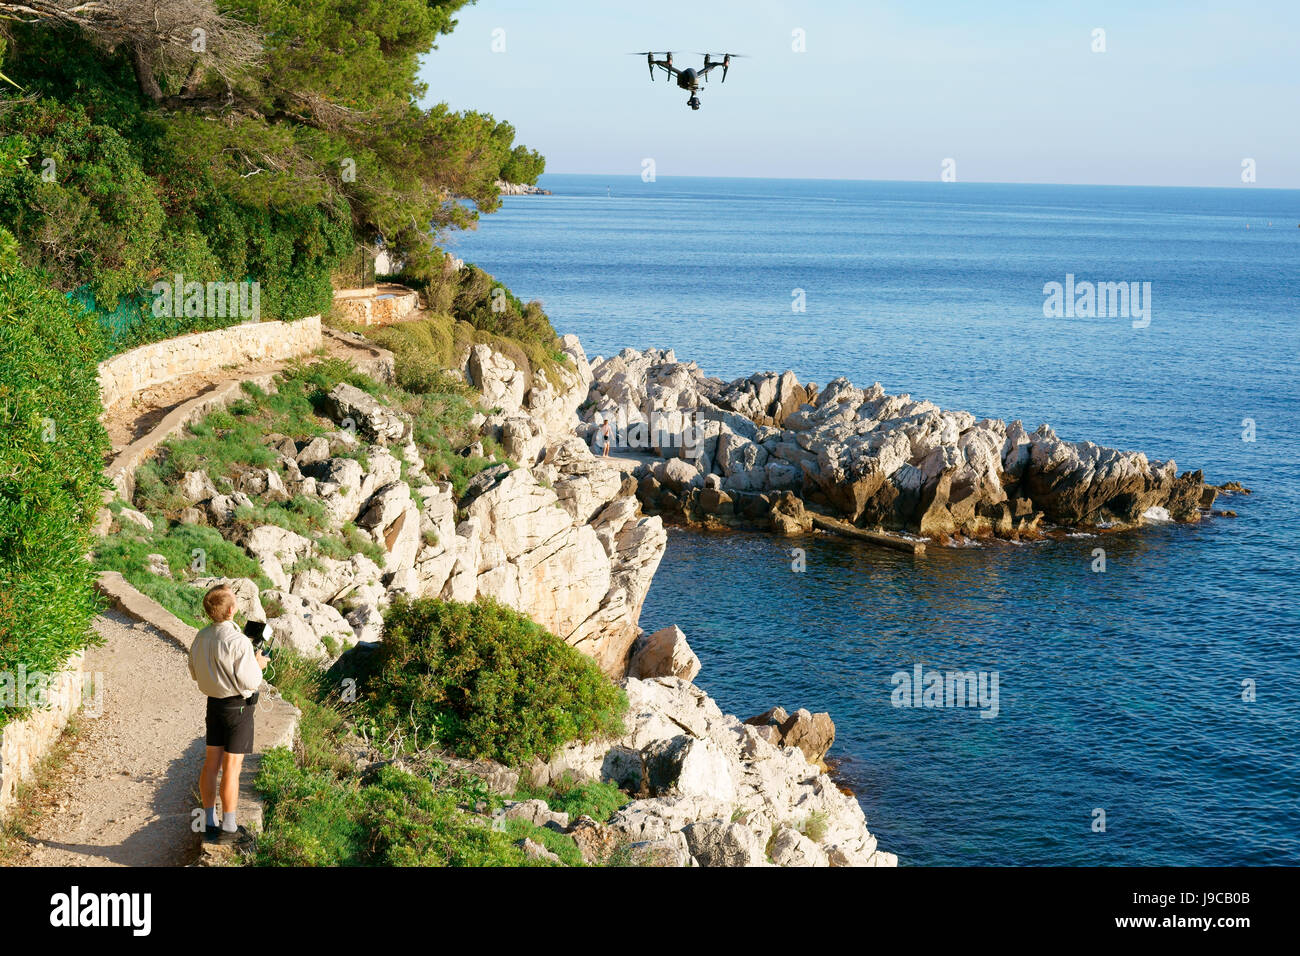 Man flying an unmanned aerial vehicle (drone). Saint-Jean-Cap-Ferrat, French Riviera, Provence-Alpes-Côte d'Azur, France. Stock Photo